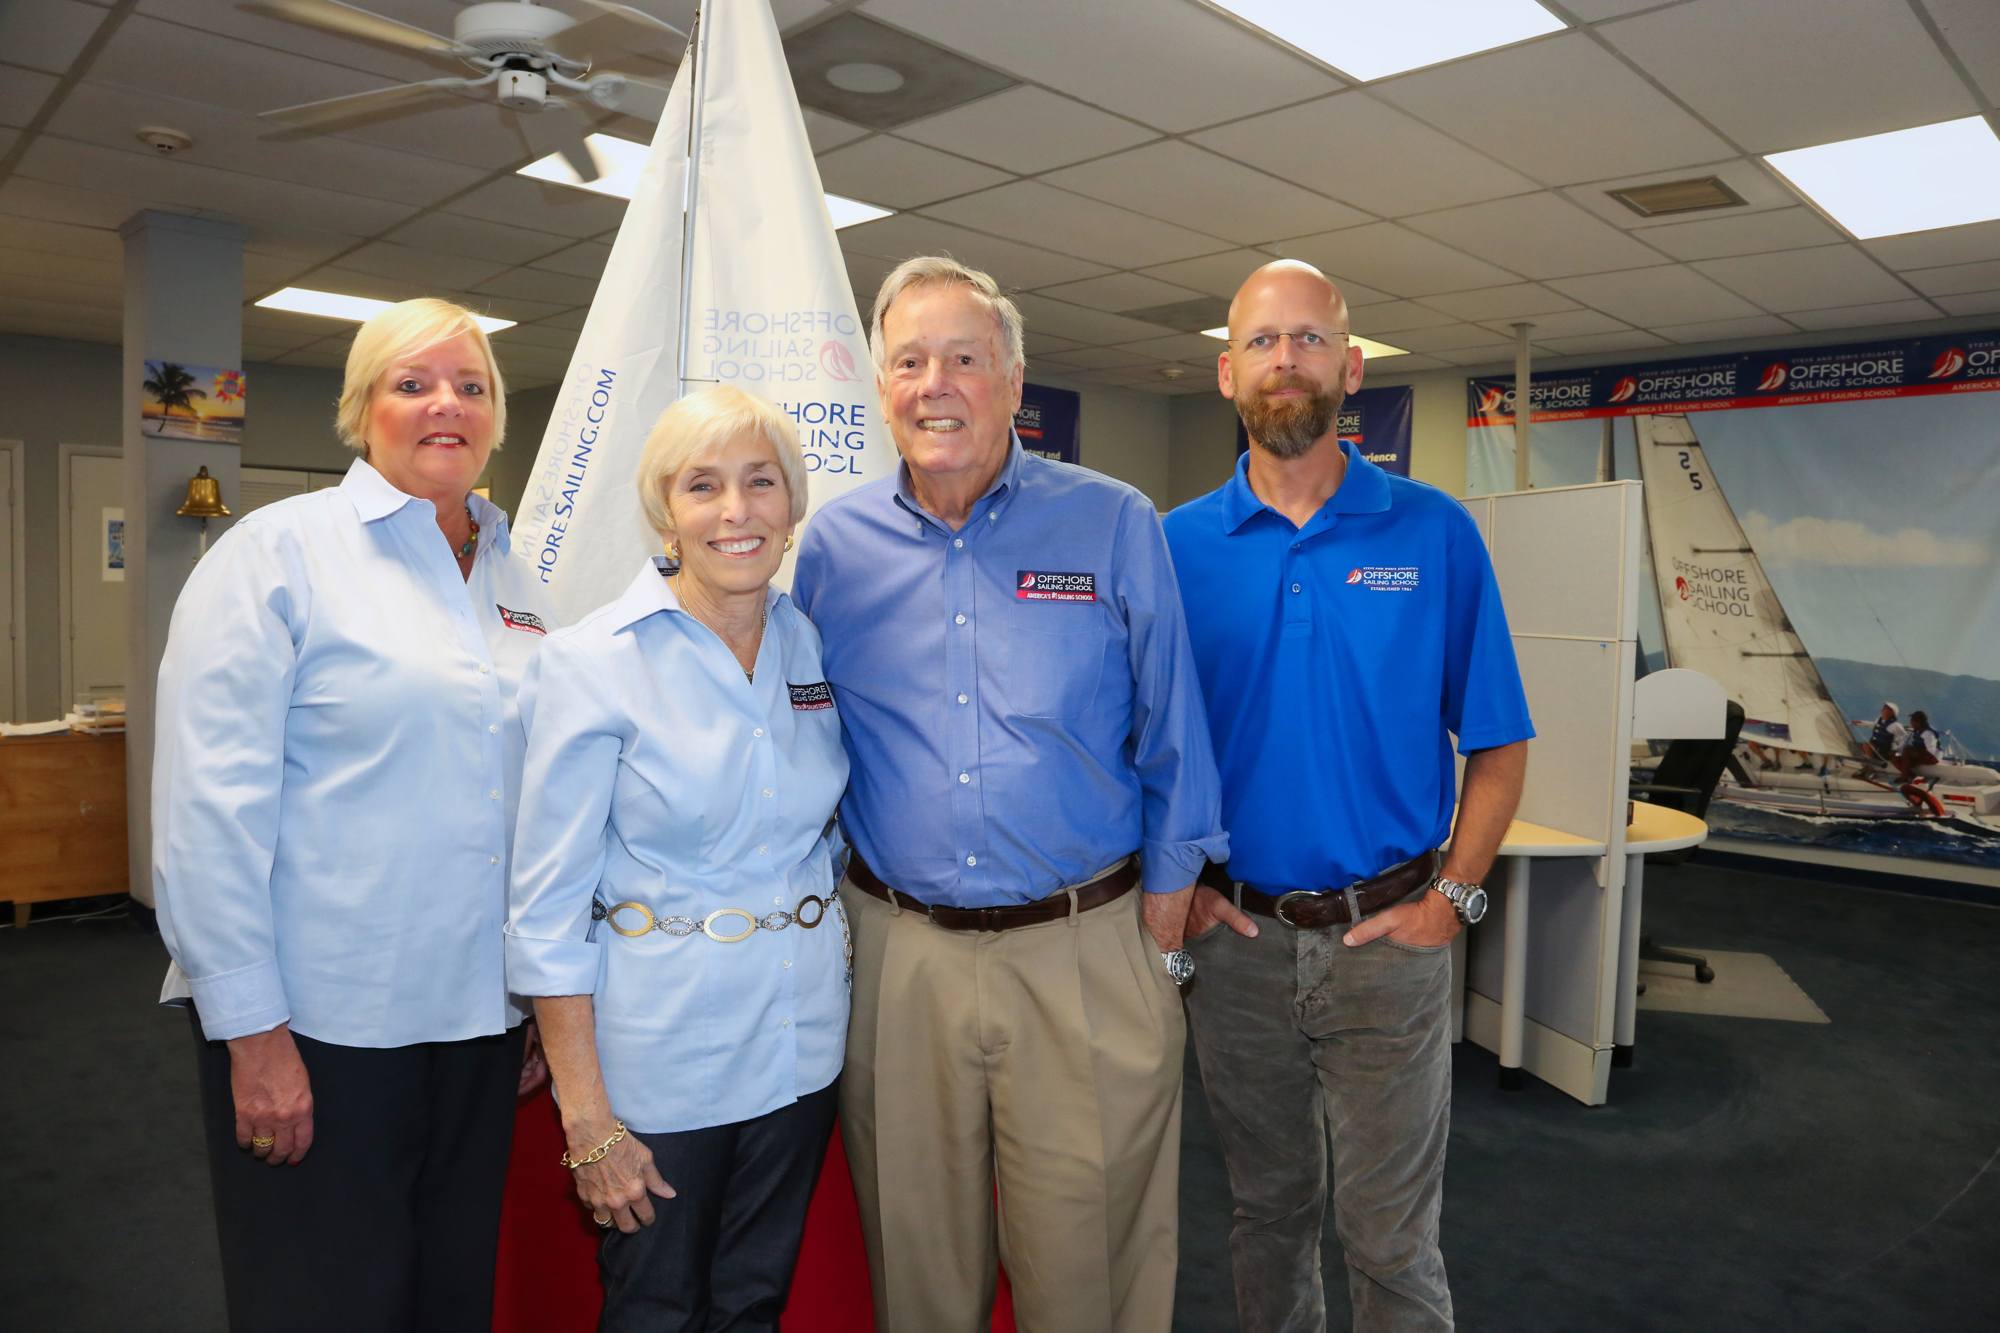 Stefania Pifferi. Beth Oliver and Bryce Jackson , far left and far right, realize they have a lot to live up to in taking on bigger leadership roles for Offshore Sailing School, which Steve and Doris Colgate have run for more than 55 years.